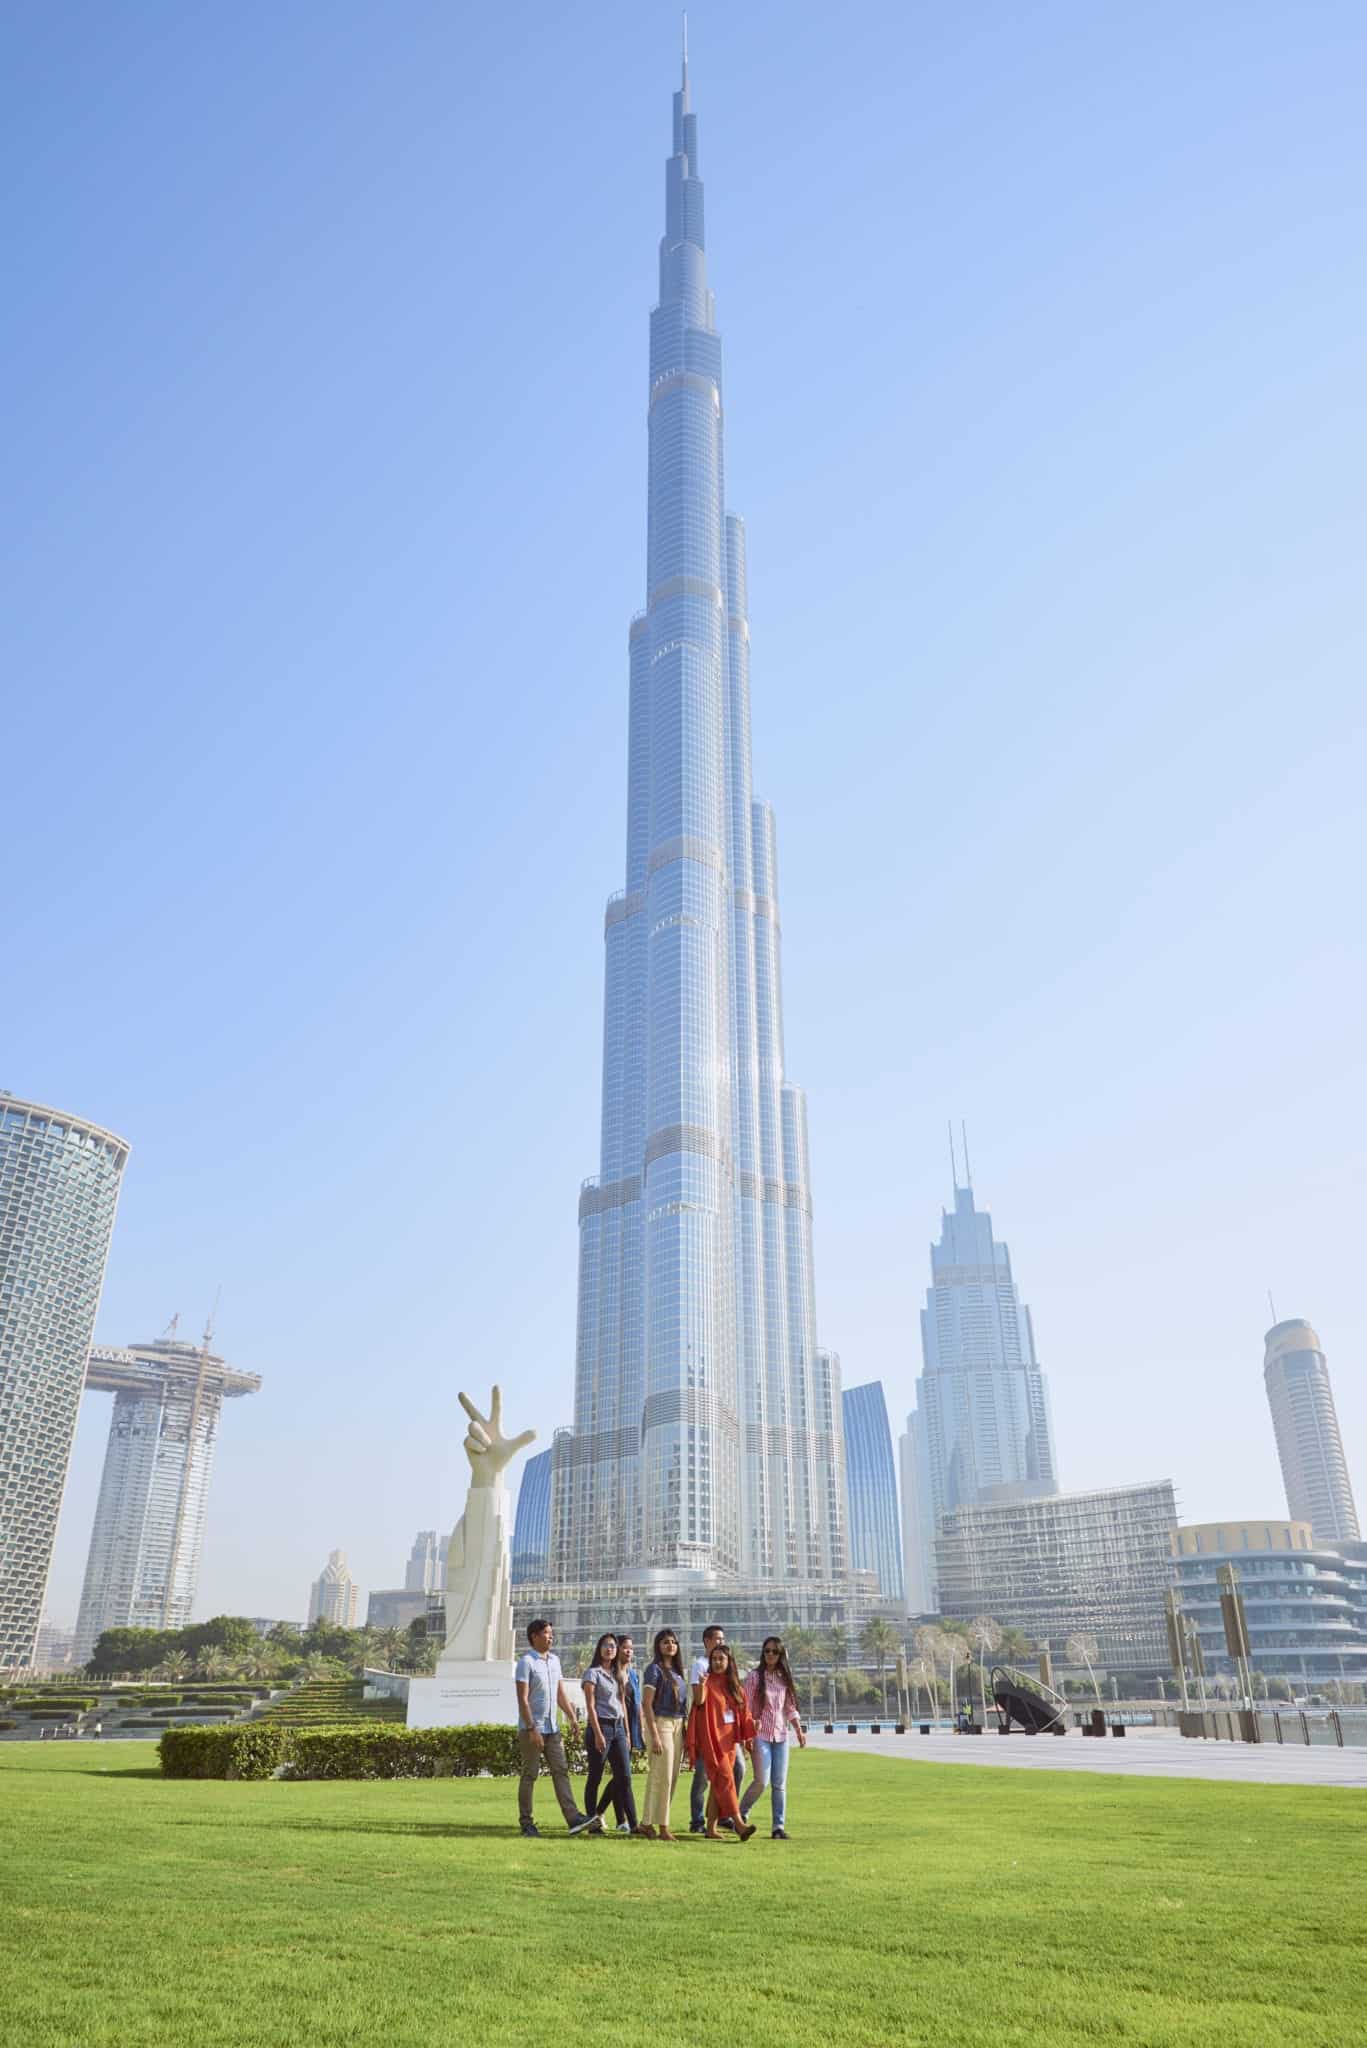 Modregning generøsitet lyd How to get tickets to the Burj Khalifa? | Free Tours by Foot